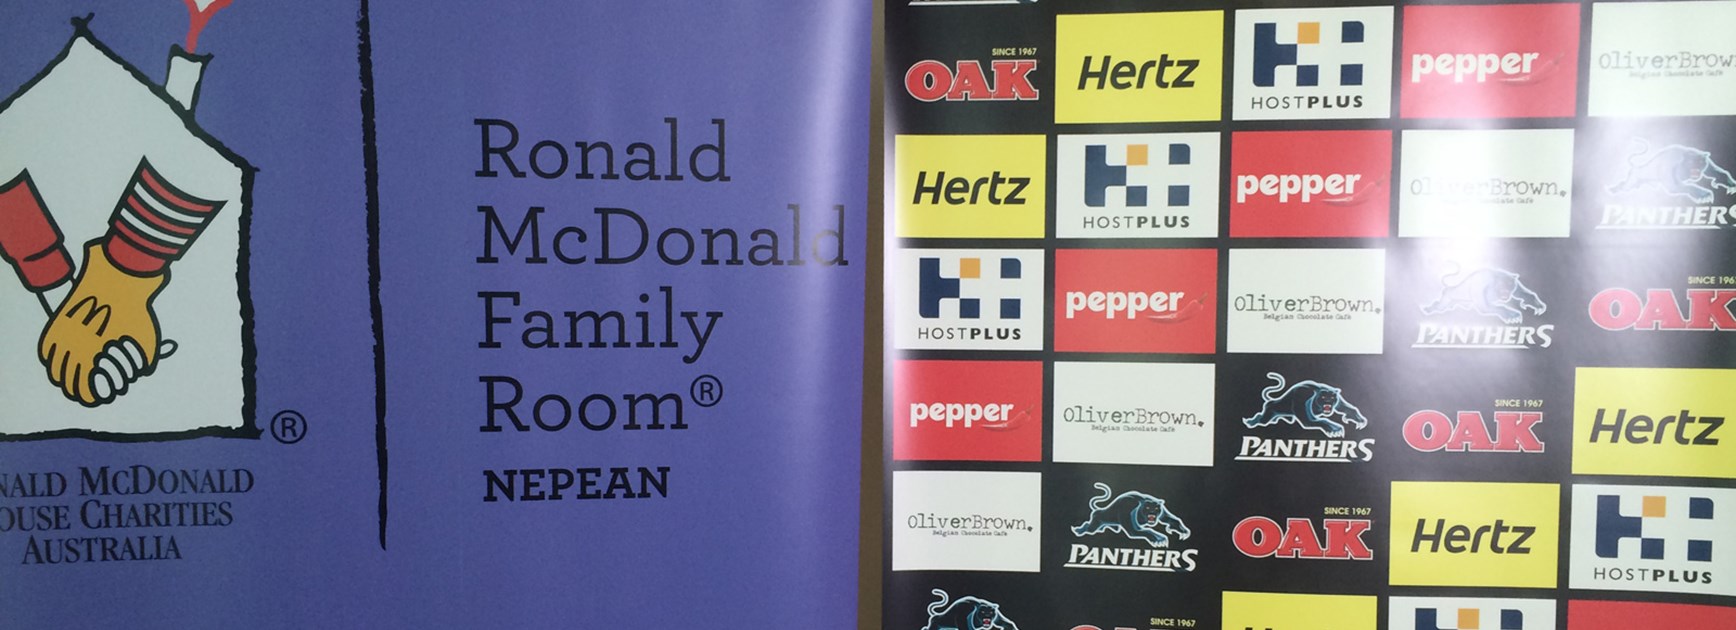 The Panthers plan to raise $100,000 for the Ronald McDonald Nepean Family Room at Nepean Hospital.